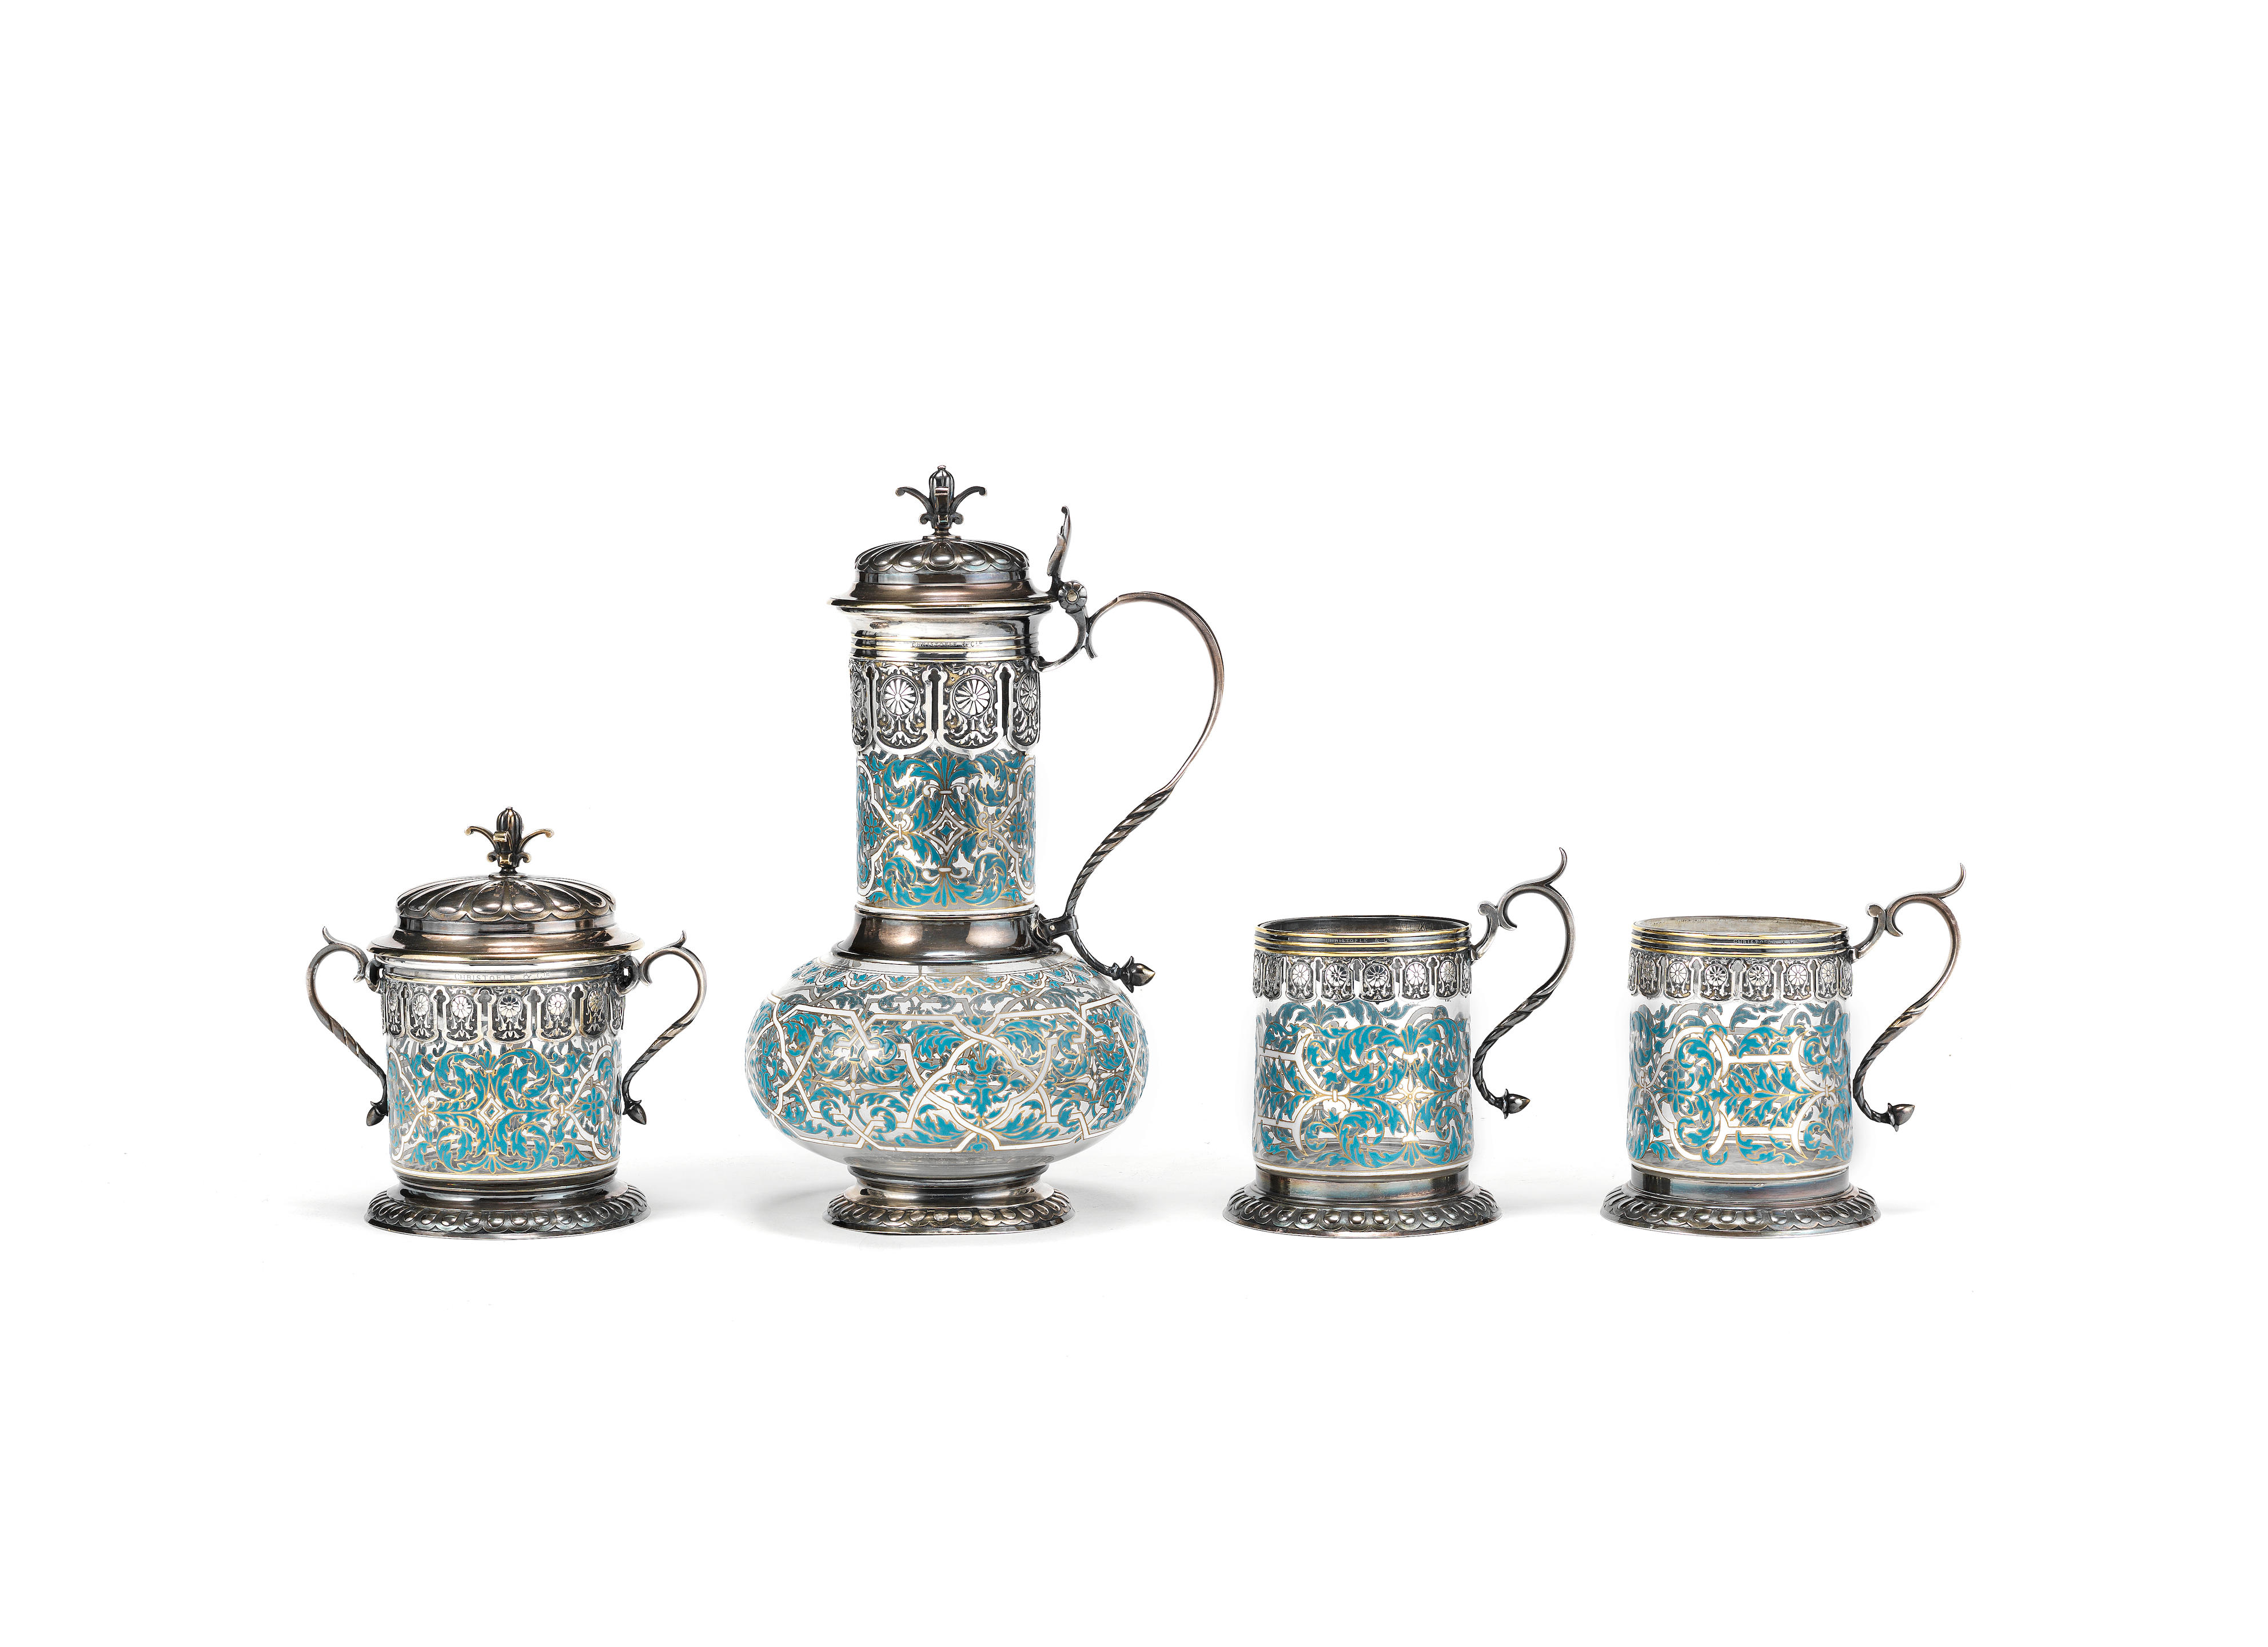 A fine French suite enamelled by Brocard with mounts by Christofle, circa 1885